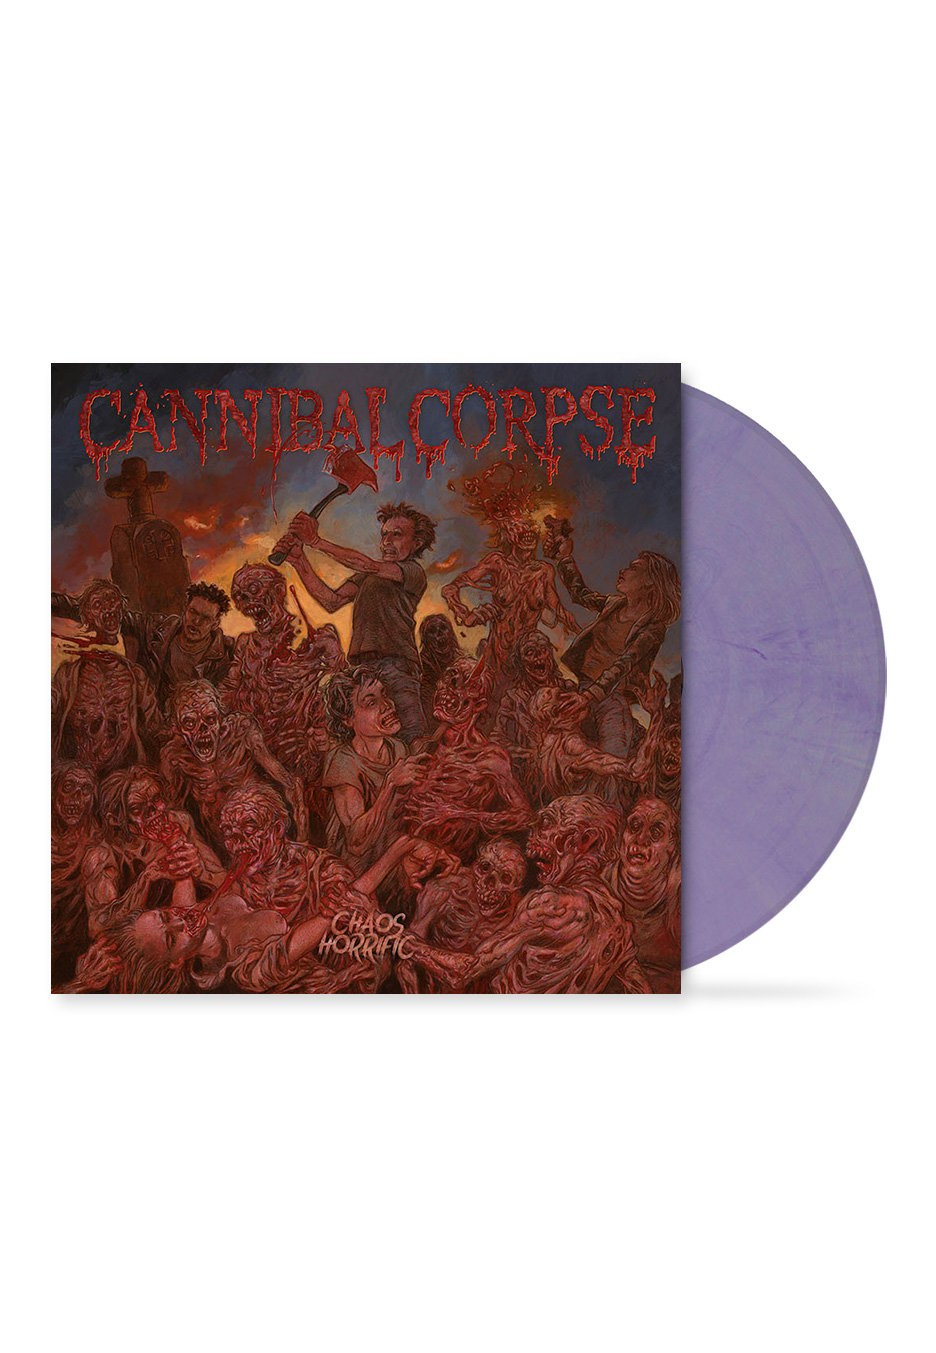 Cannibal Corpse - Chaos Horrific Pearl Violet - Marbled Vinyl